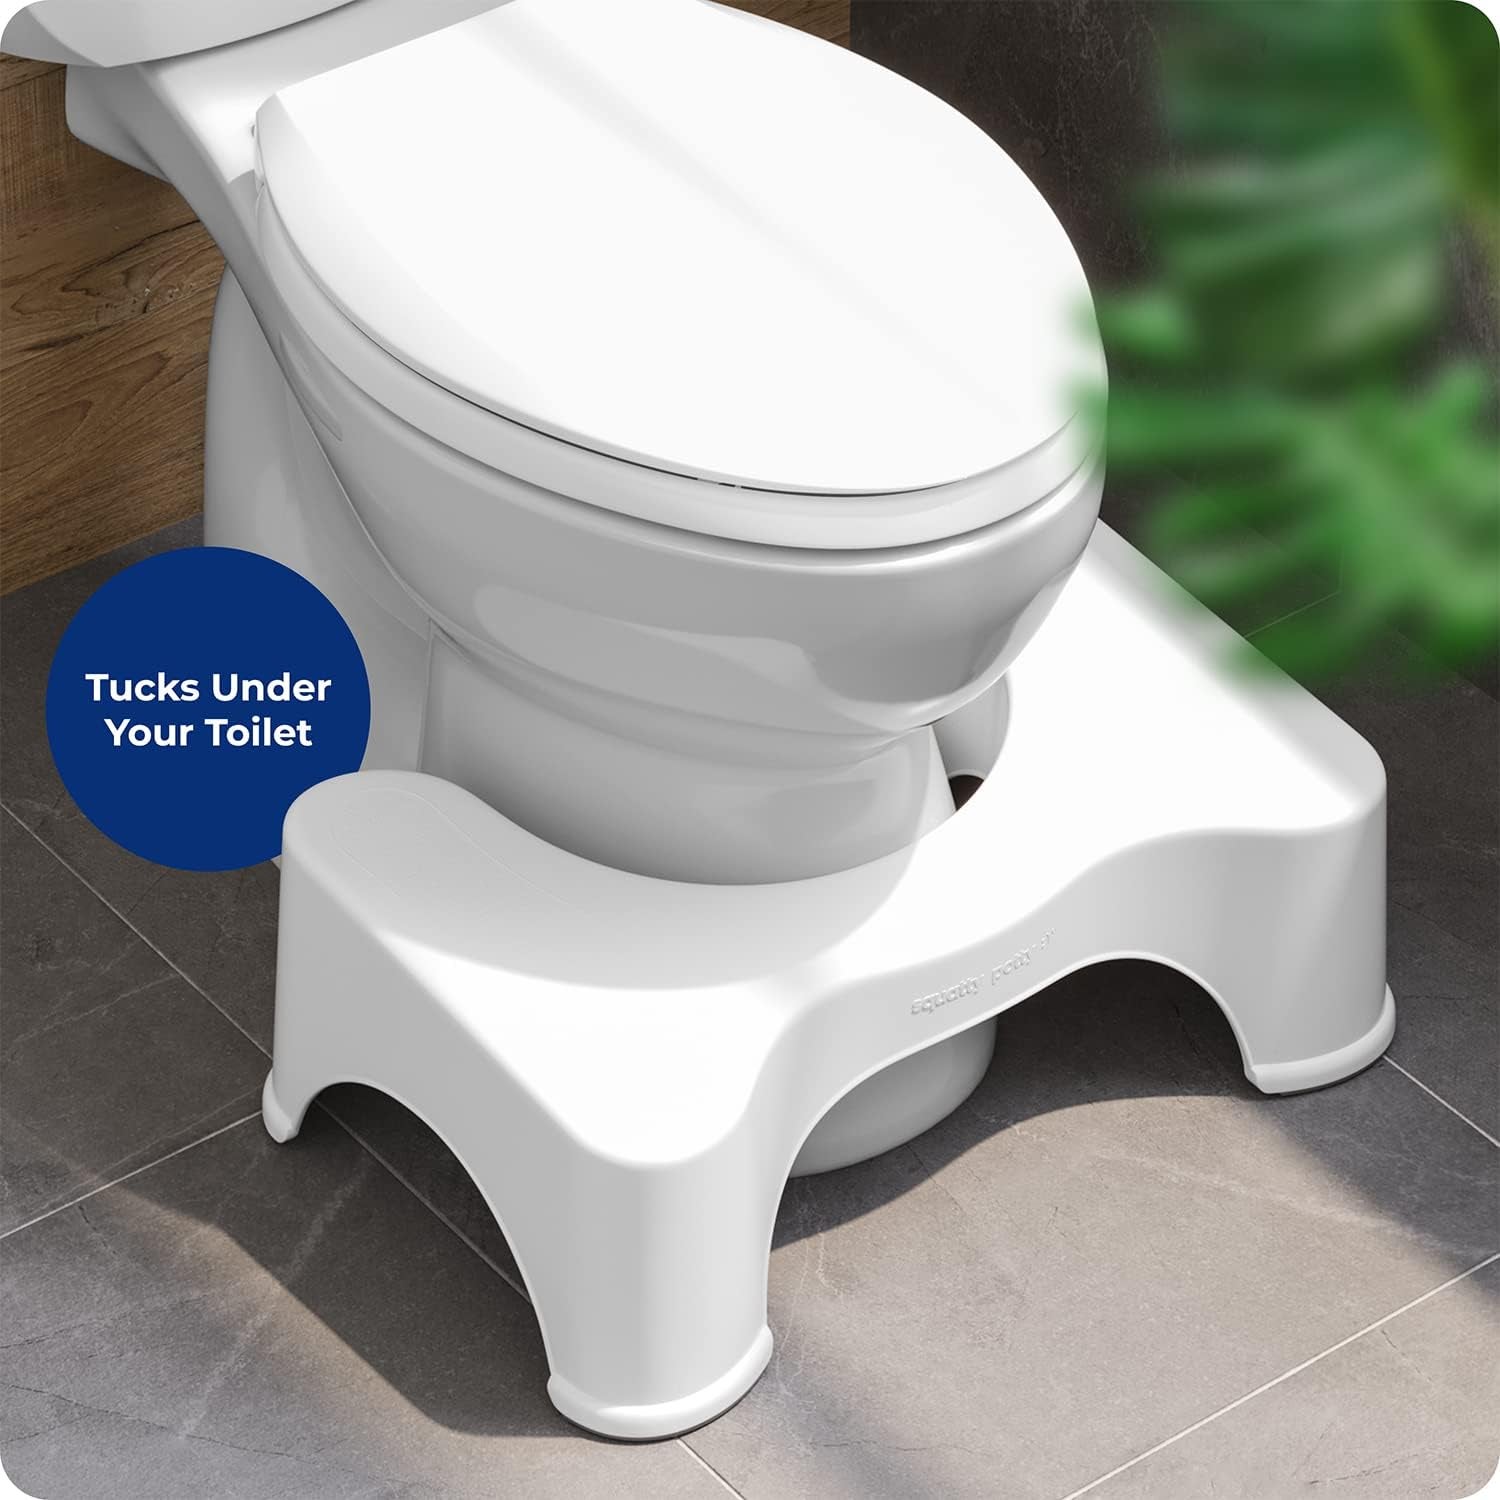 The squatty potty tucked under a toilet